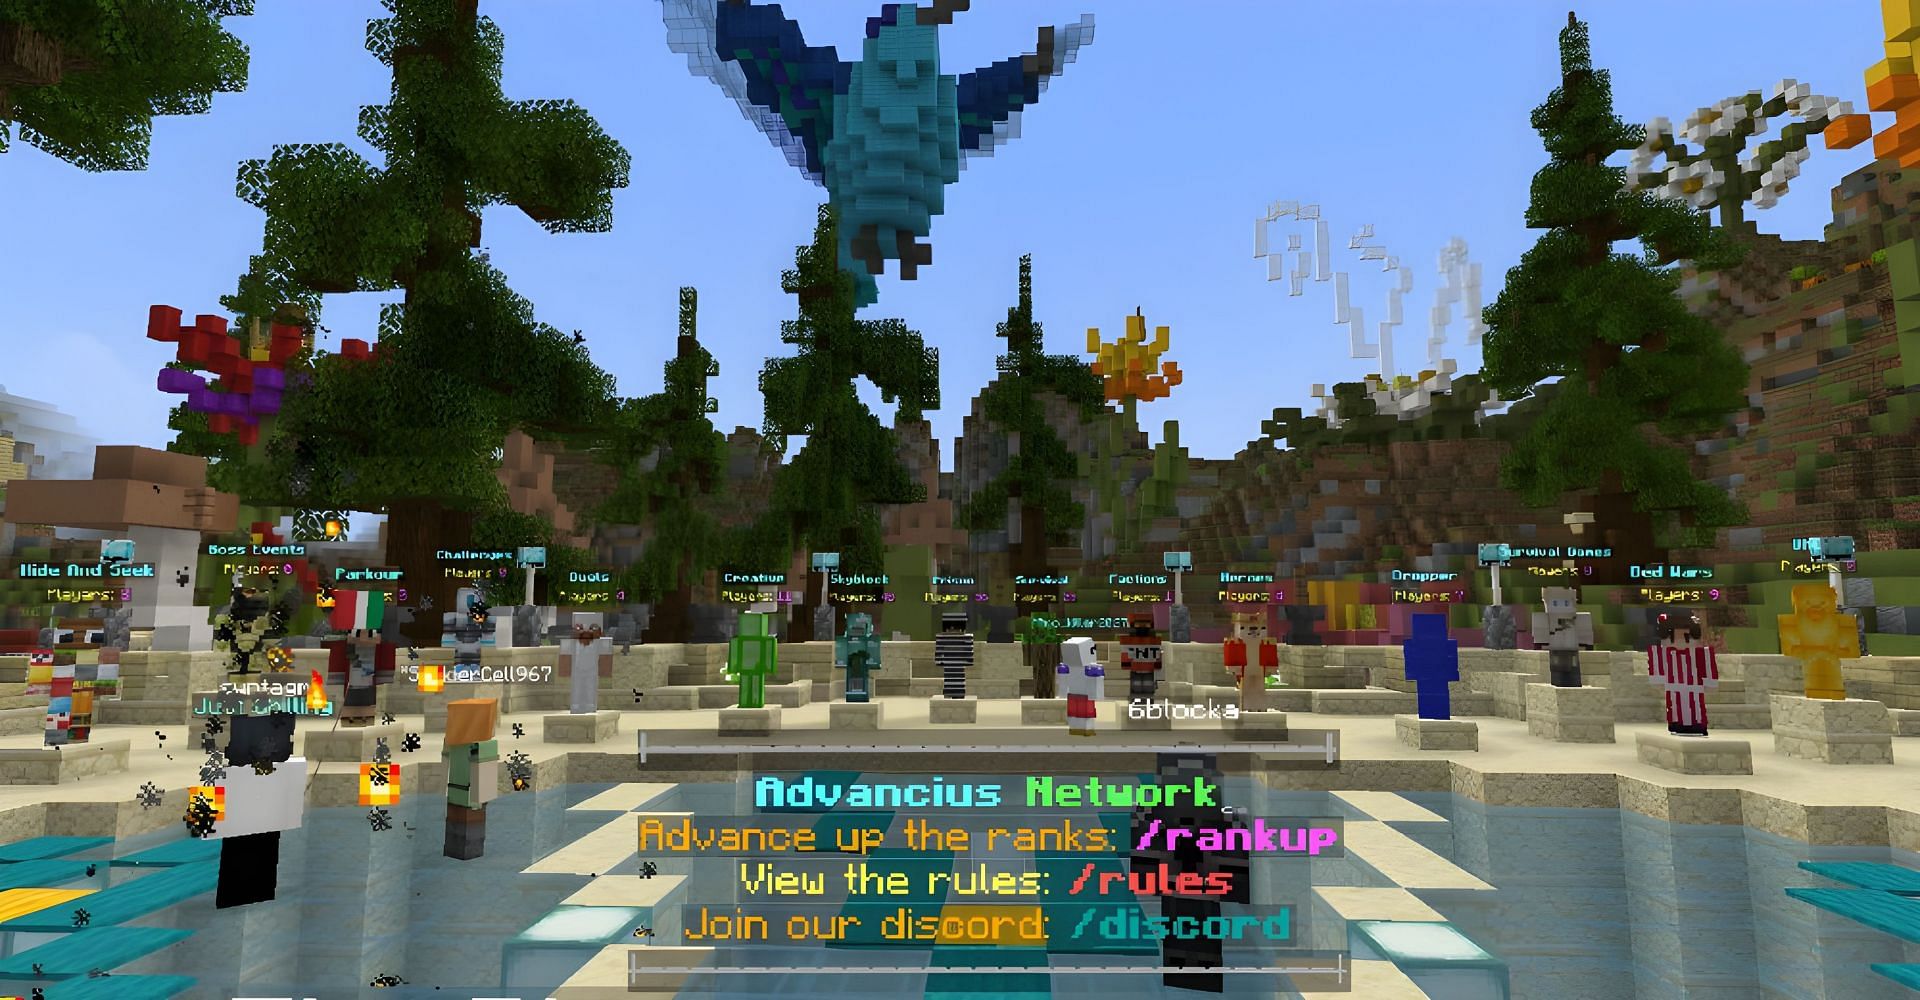 Advancius Network is a popular server with many game modes (Image via Mojang)